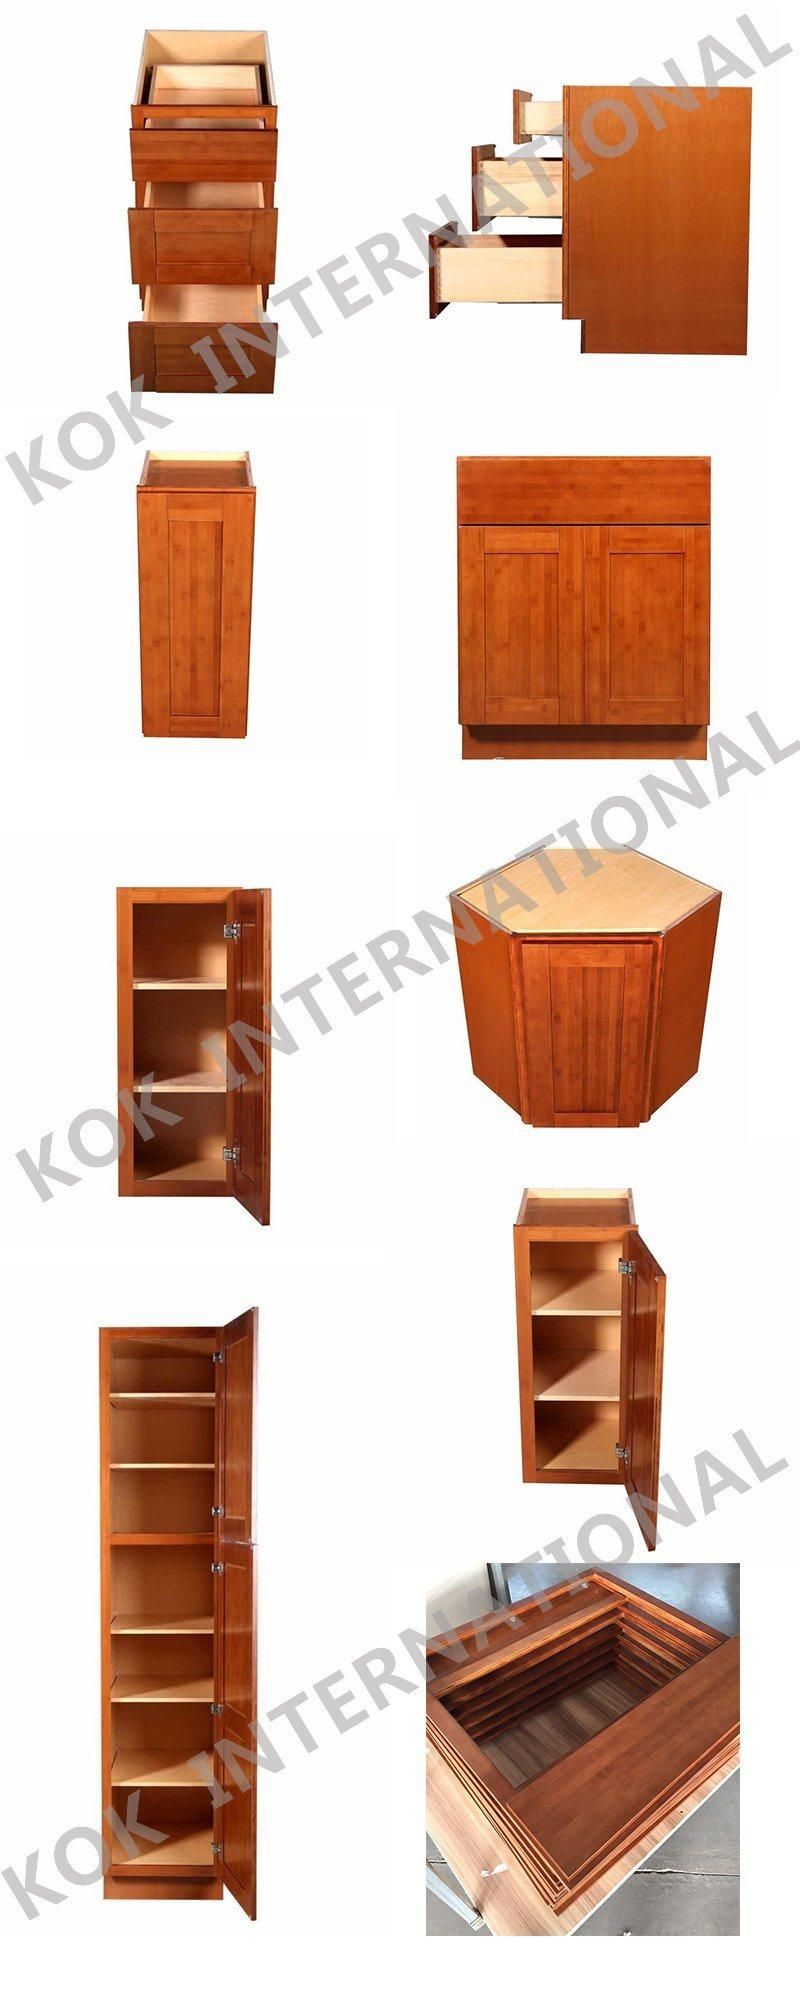 American Style Kitchen Cabinet Bamboo Shaker W3012